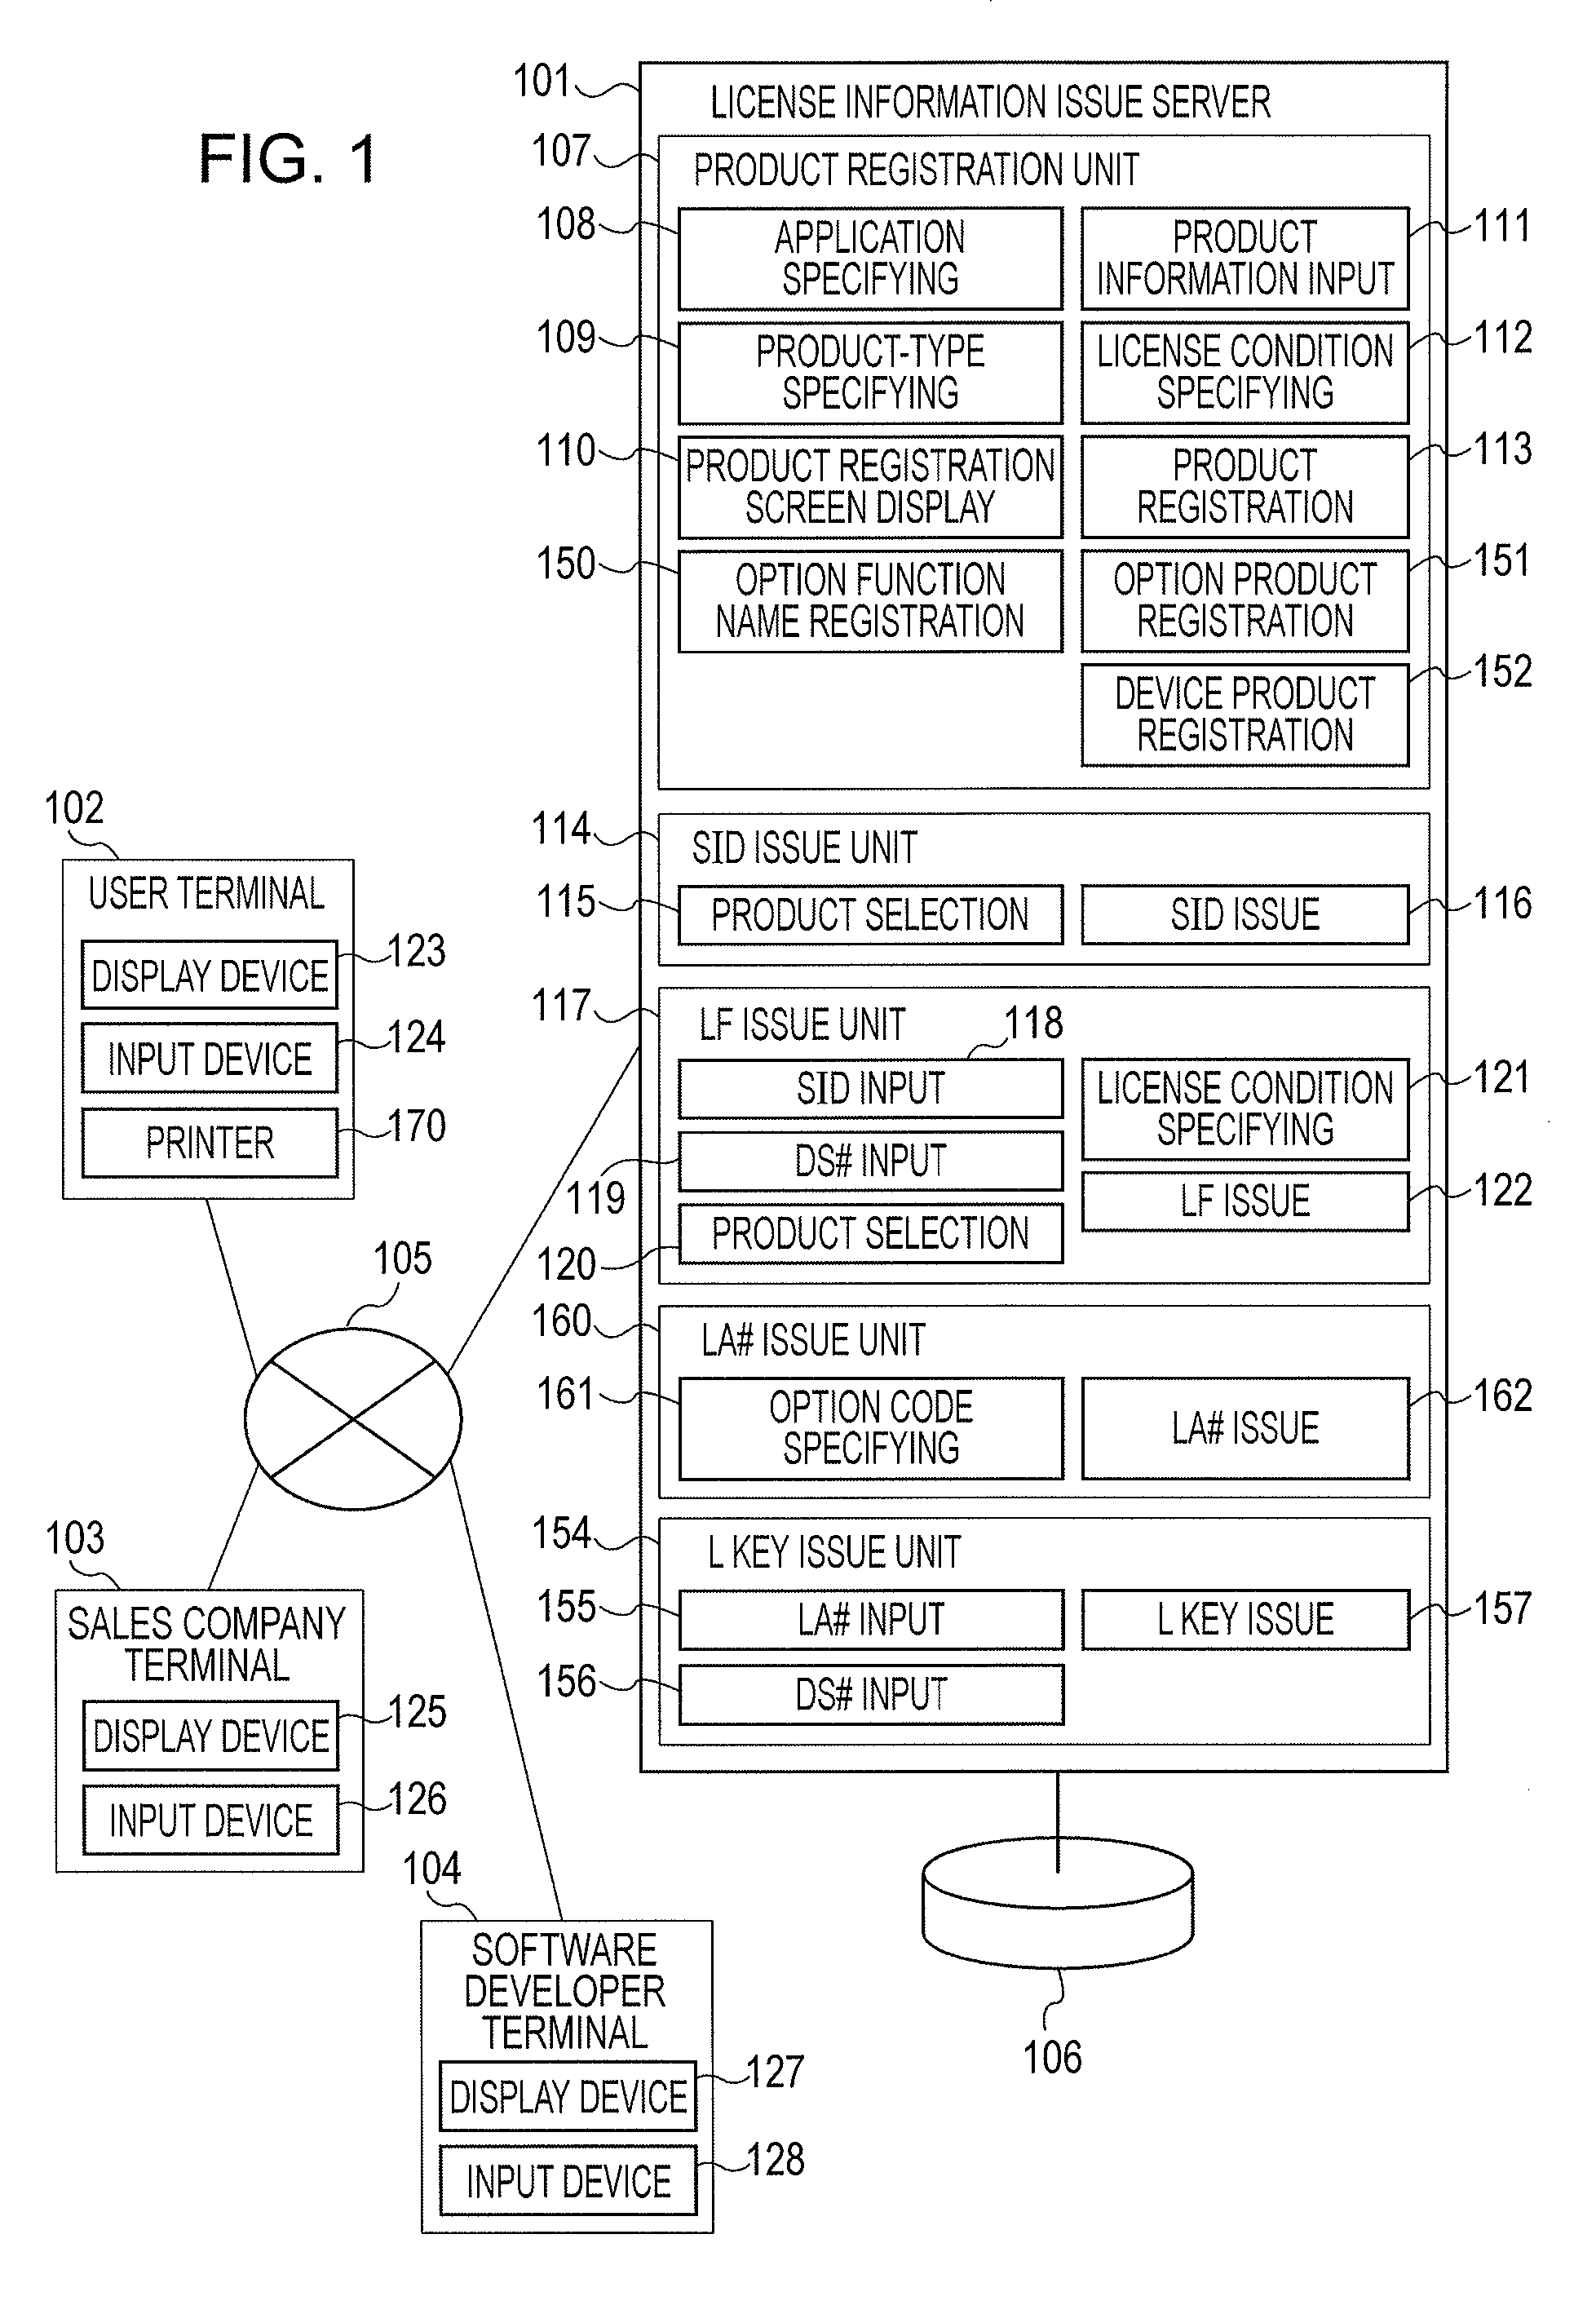 License transfer system, user terminal, and license information issue server